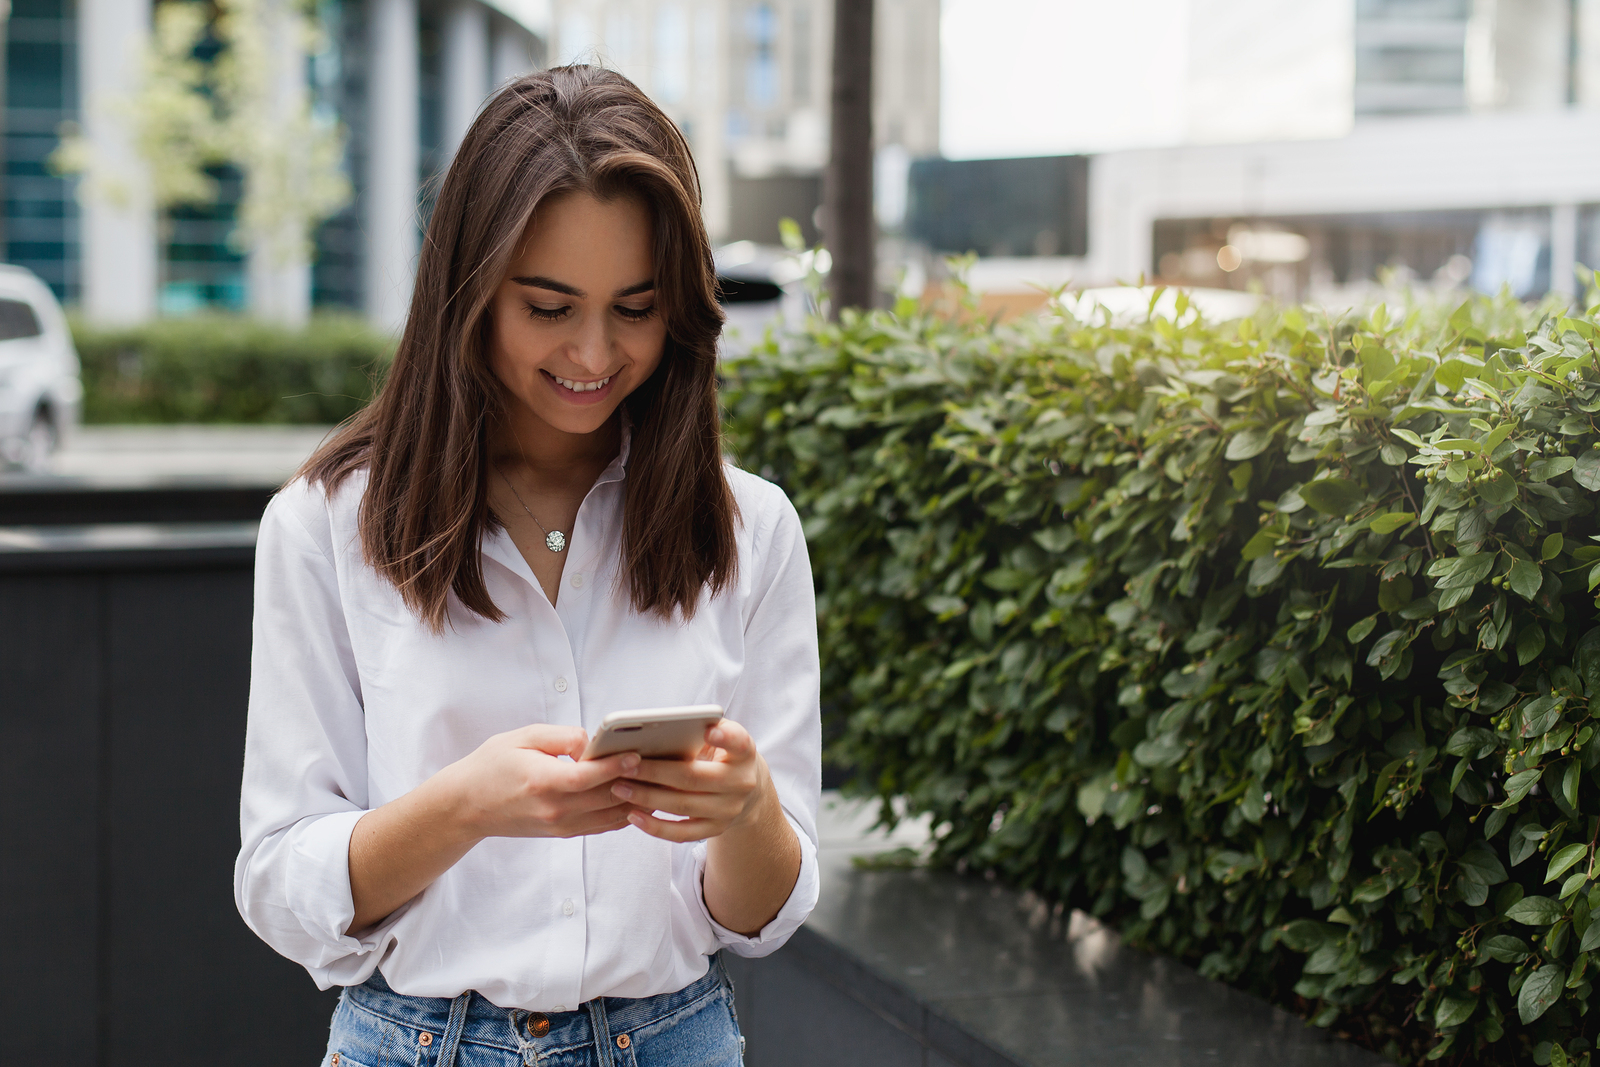 6 Reasons to Use Business Text Messaging